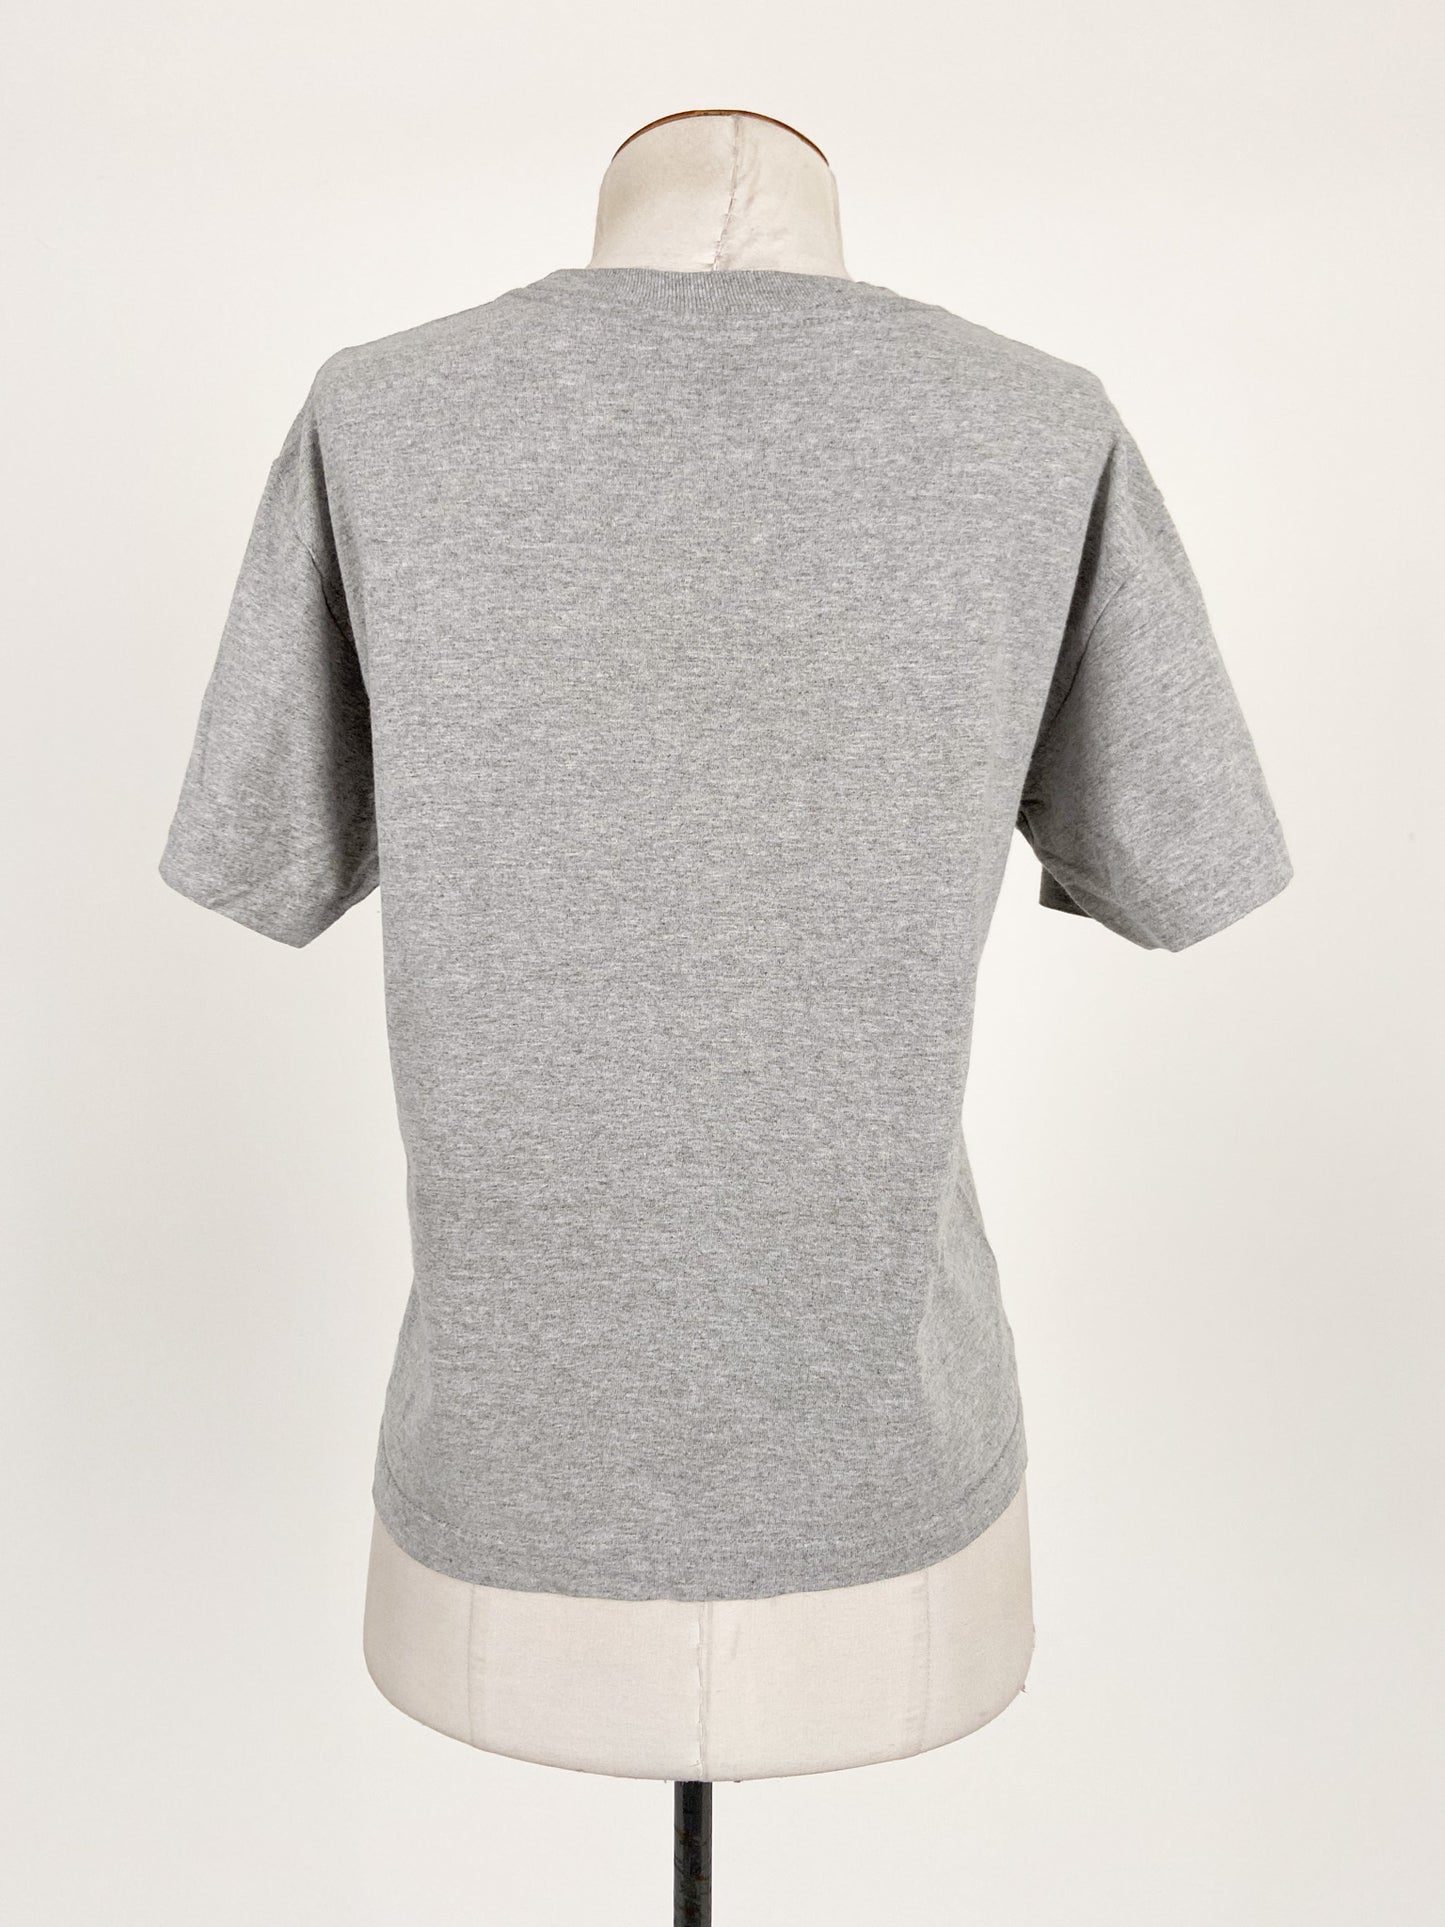 Levi's | Grey Casual Top | Size M